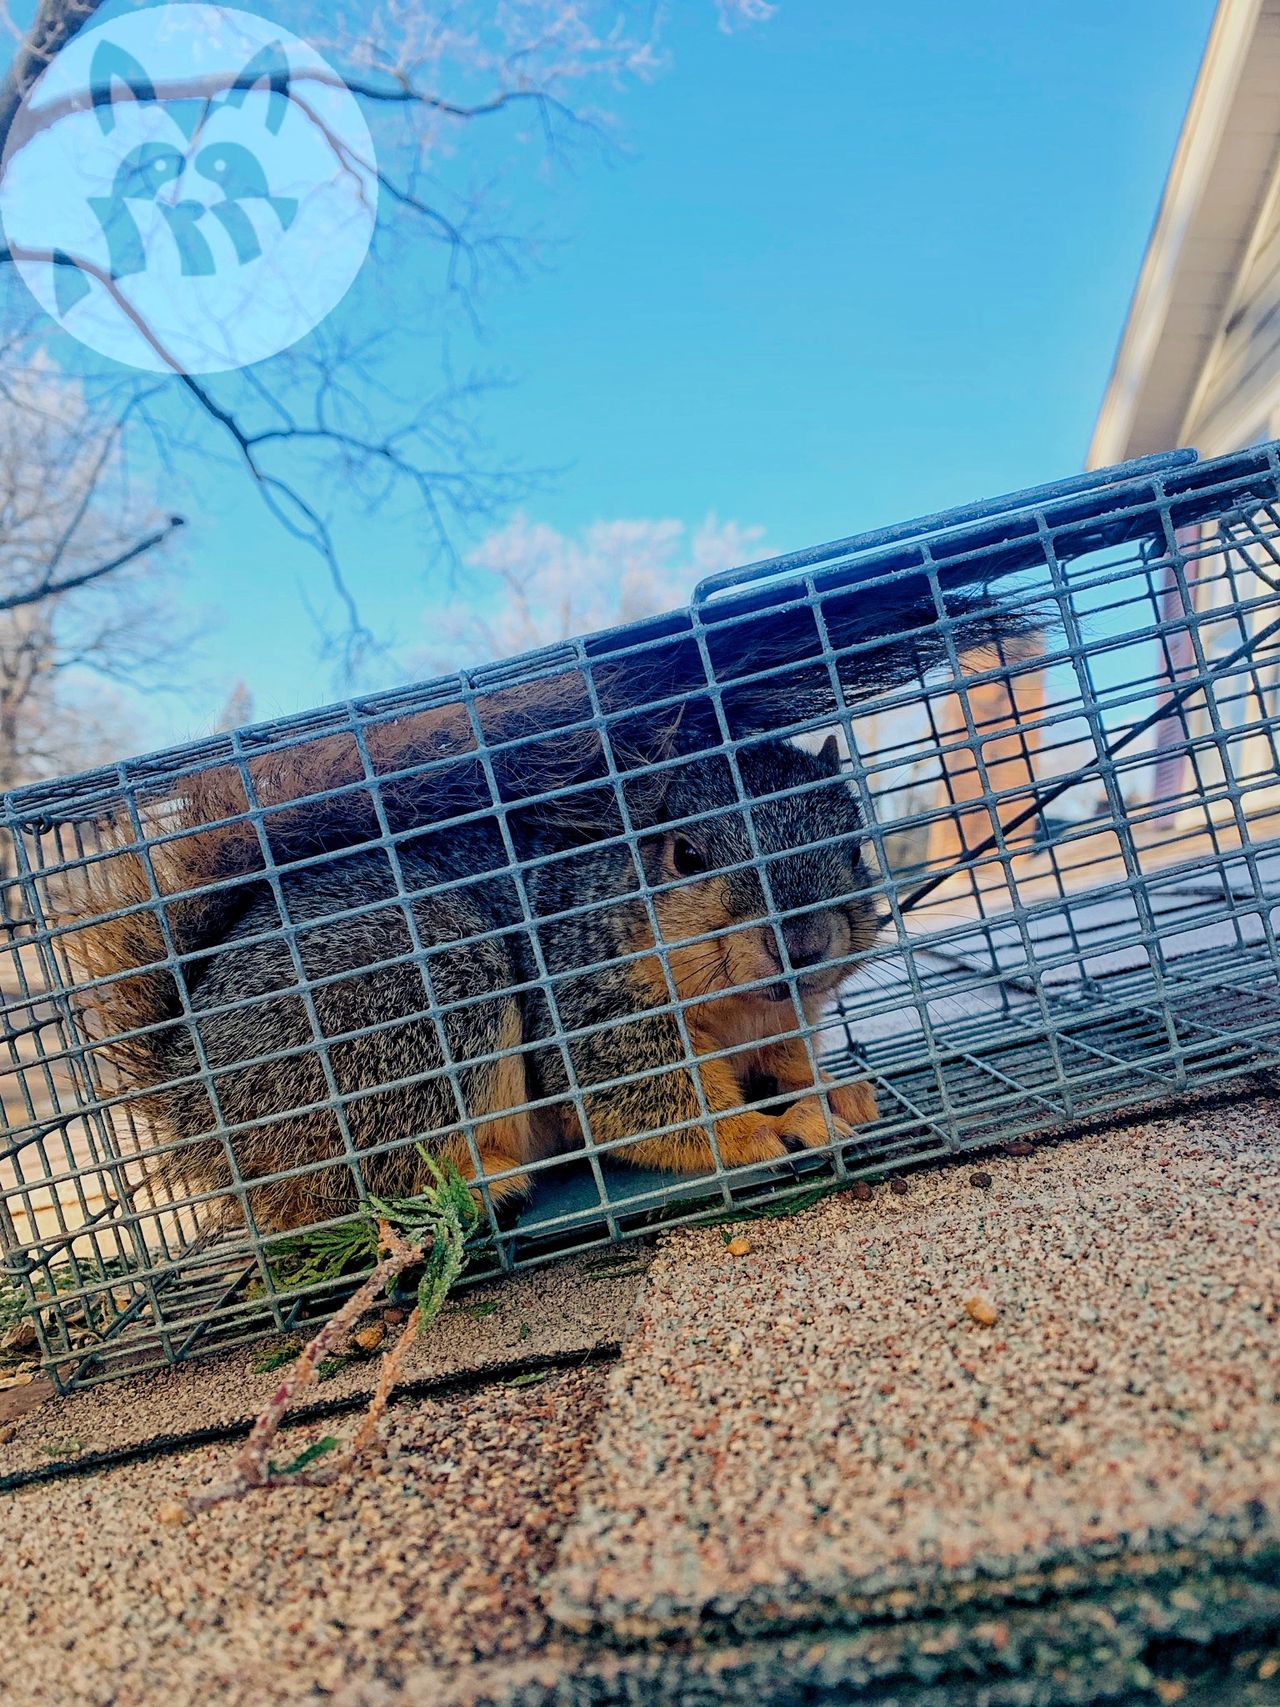 How to Get Squirrels Out of the Attic - Evictor